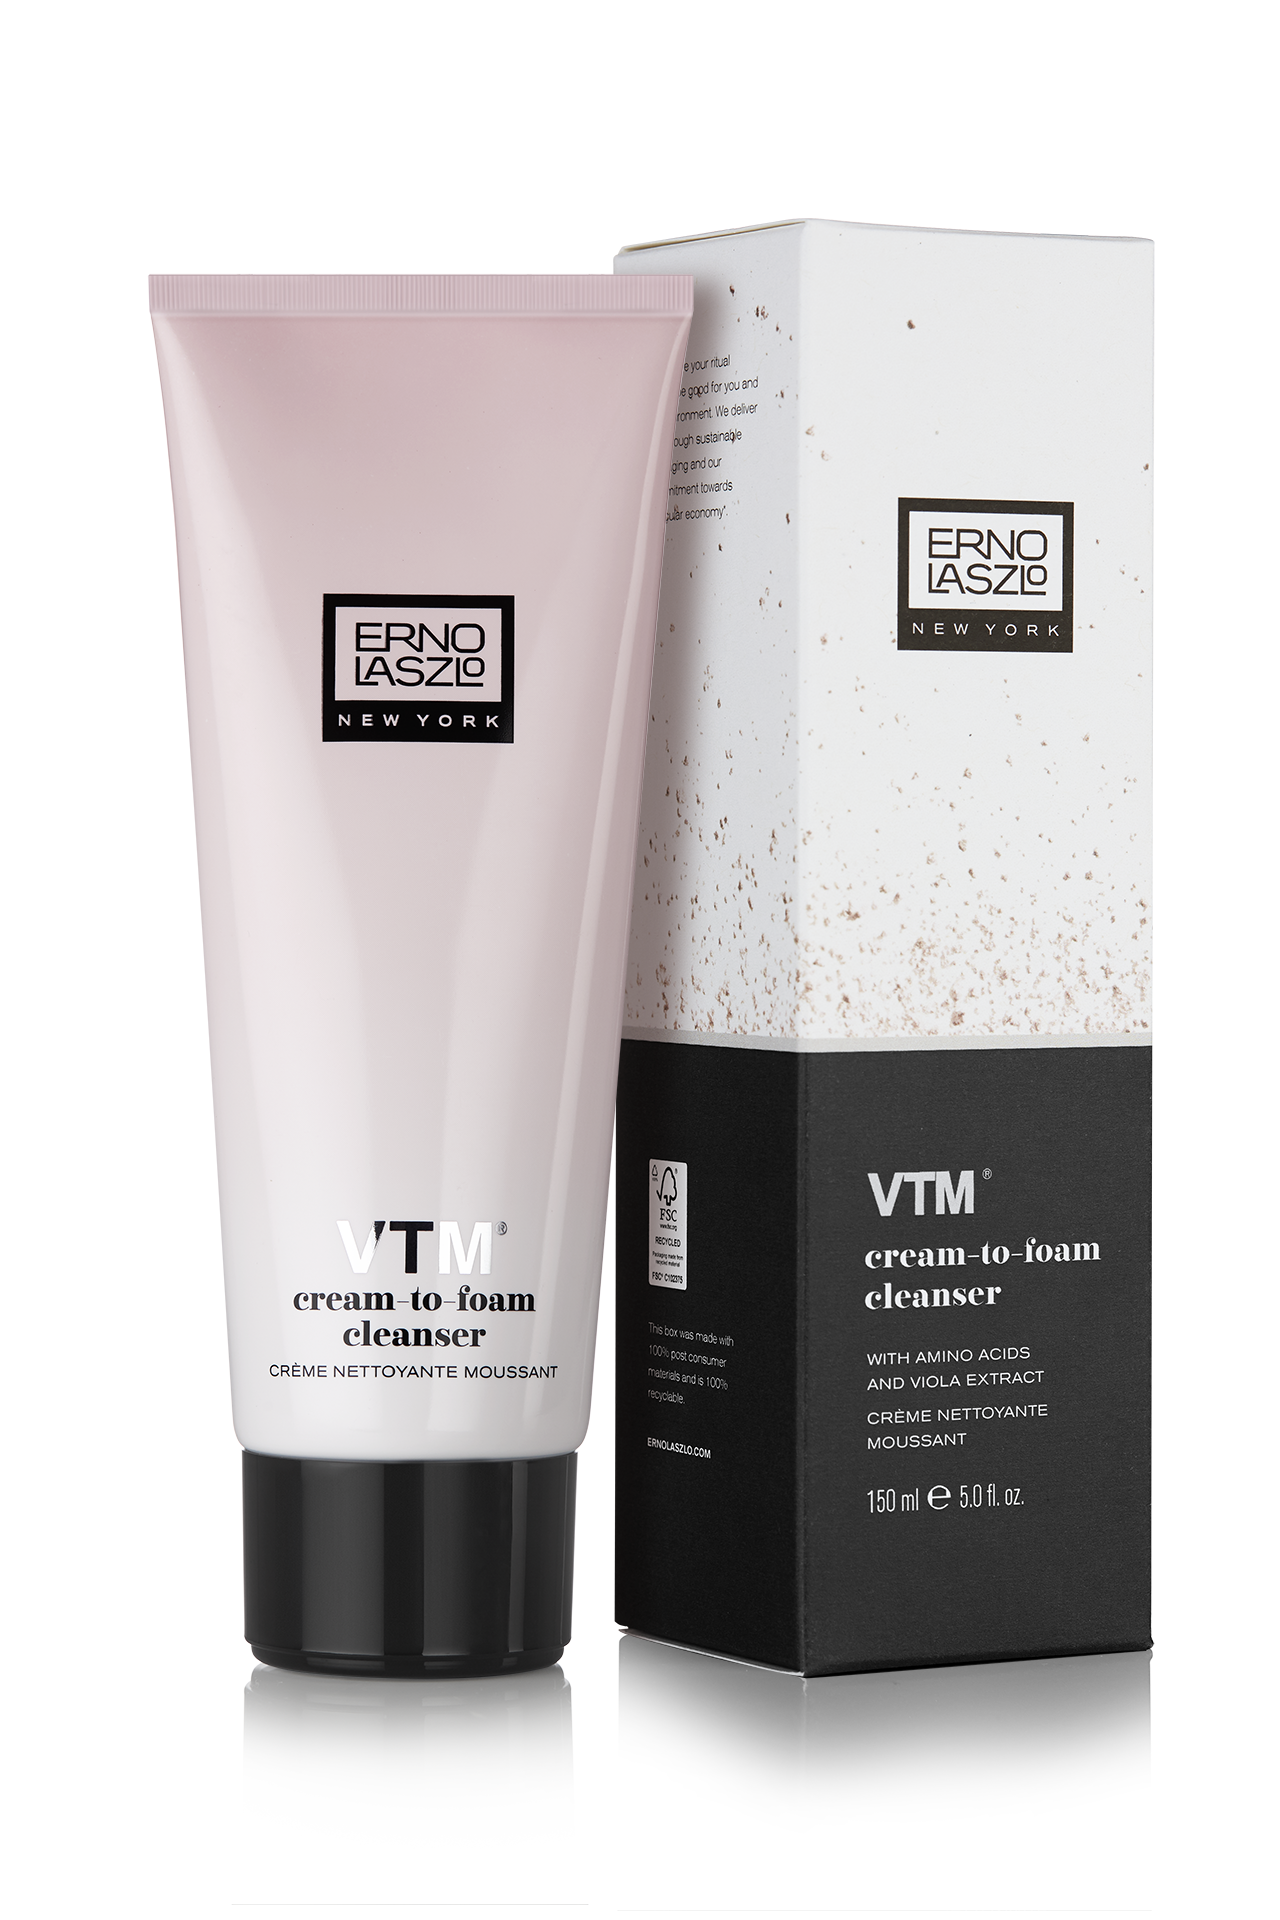 El_Q3_2021_VTM Cream-to-Foam Cleanser 150ml_With_CTO_5291a_Fin_LowRes